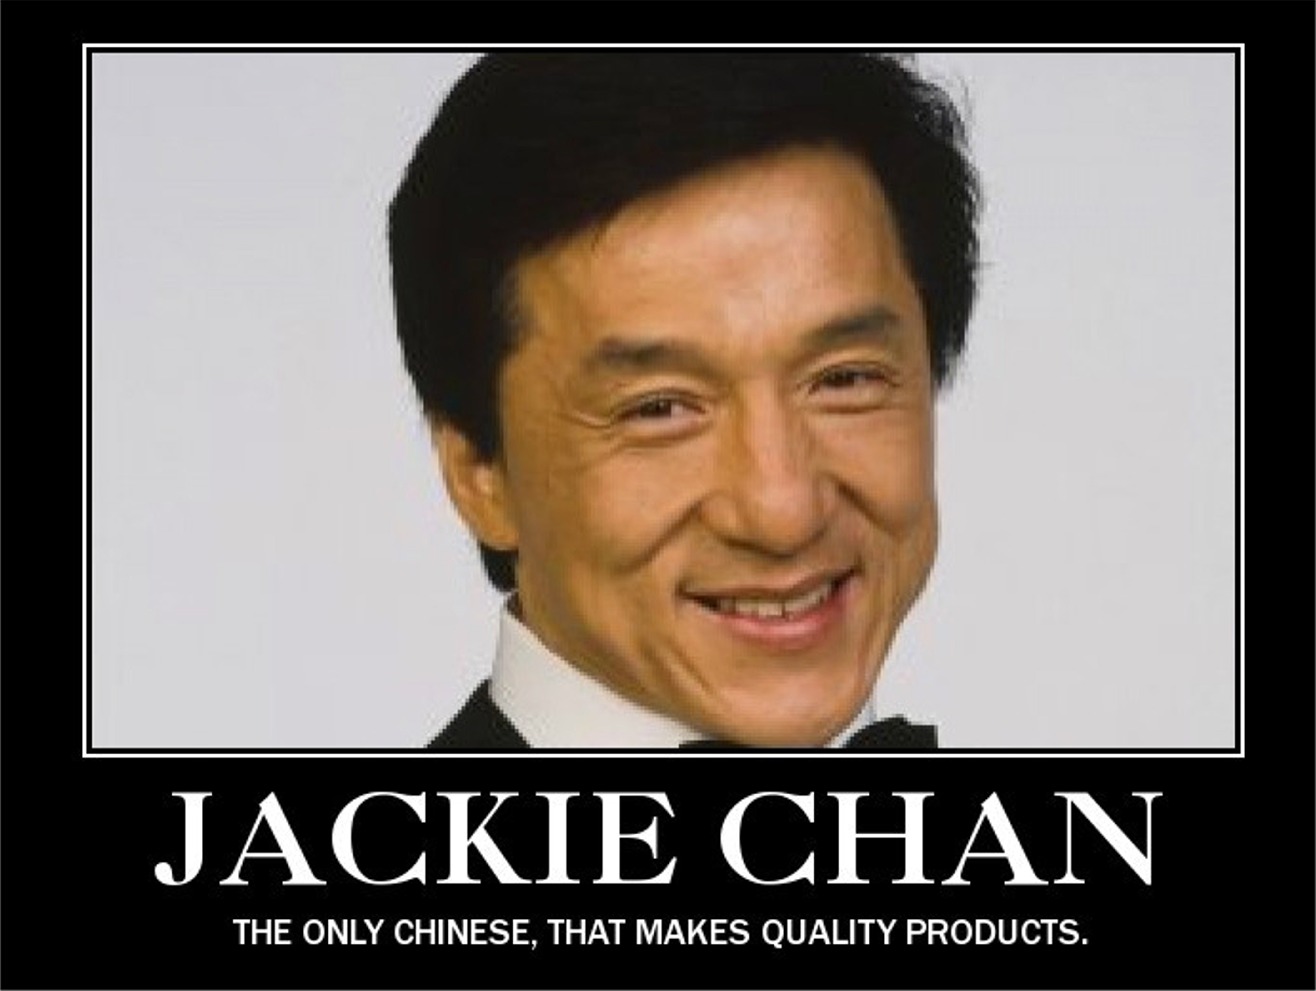 jackie chan - Jackie Chan The Only Chinese, That Makes Quality Products.